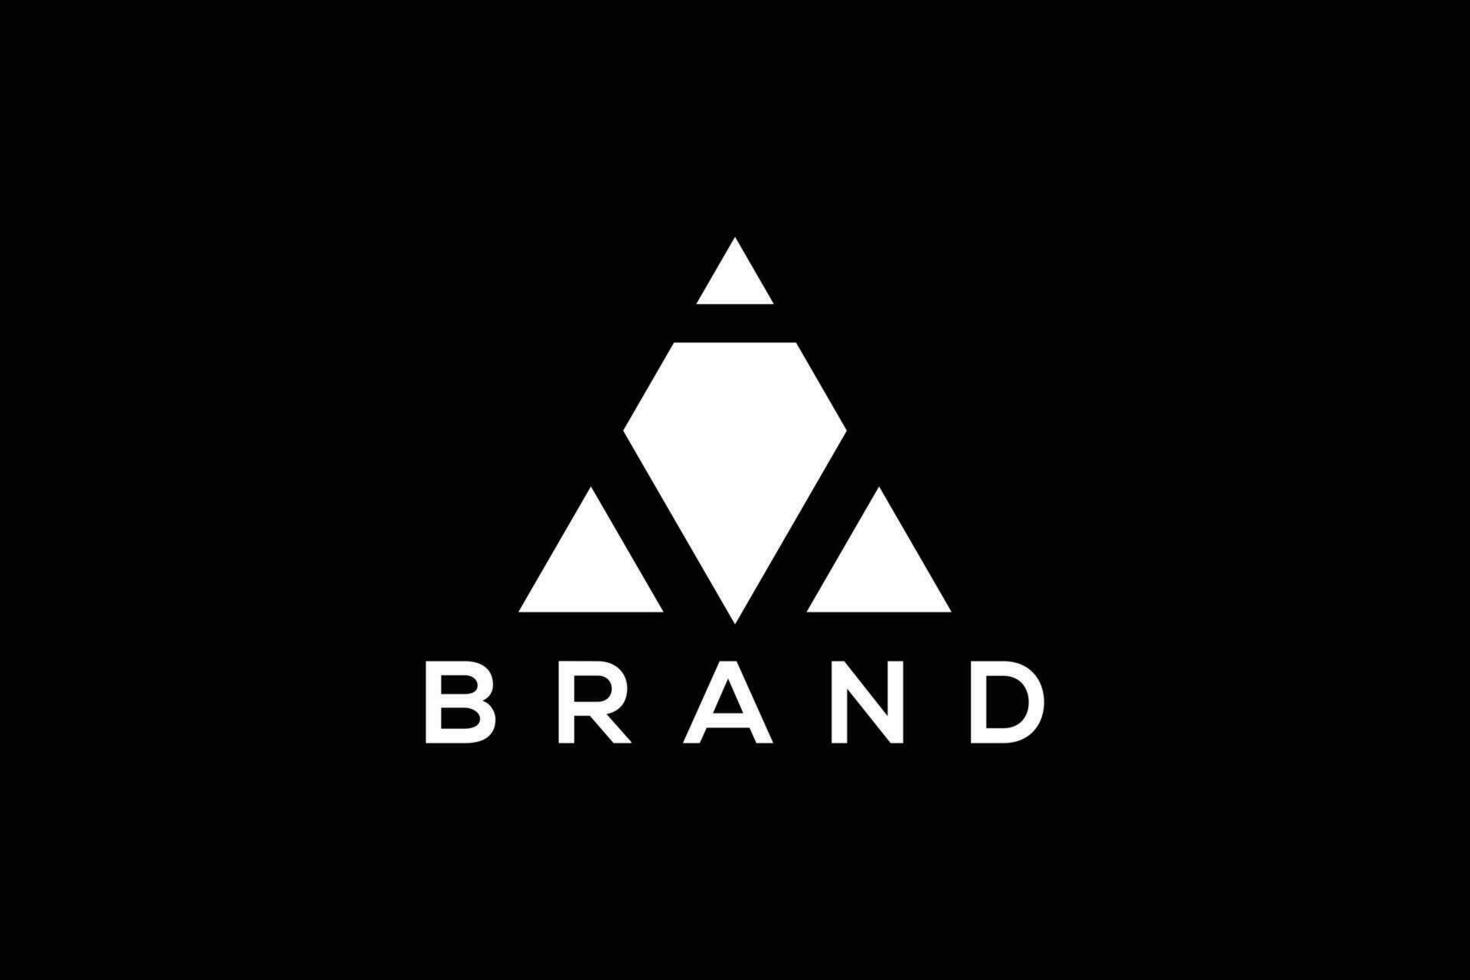 Minimal and abstract triangle vector logo design